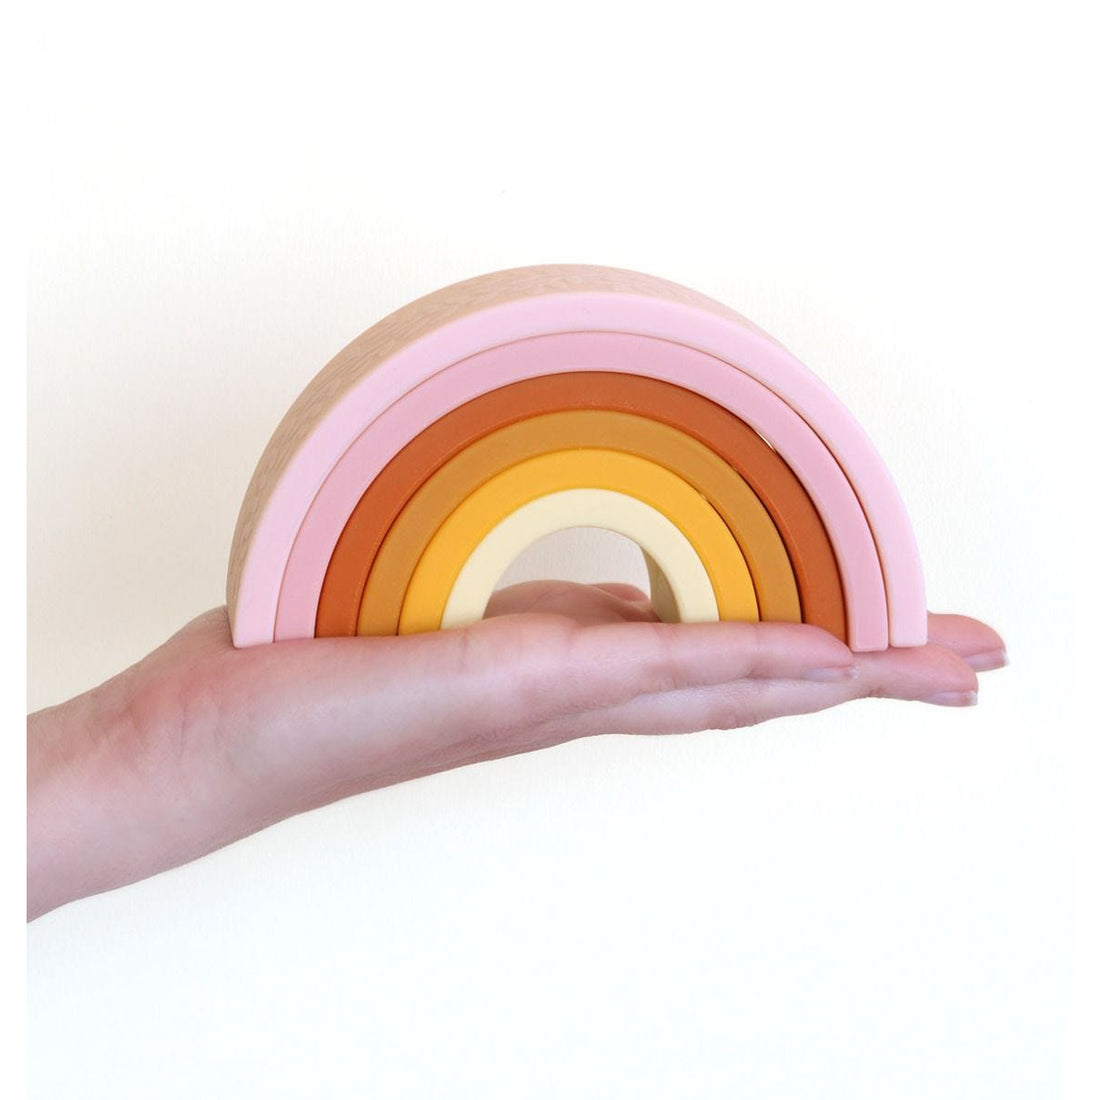 a-little-lovely-company-rainbow-stacking-toy-sunset-allc-sistsu01- (6)